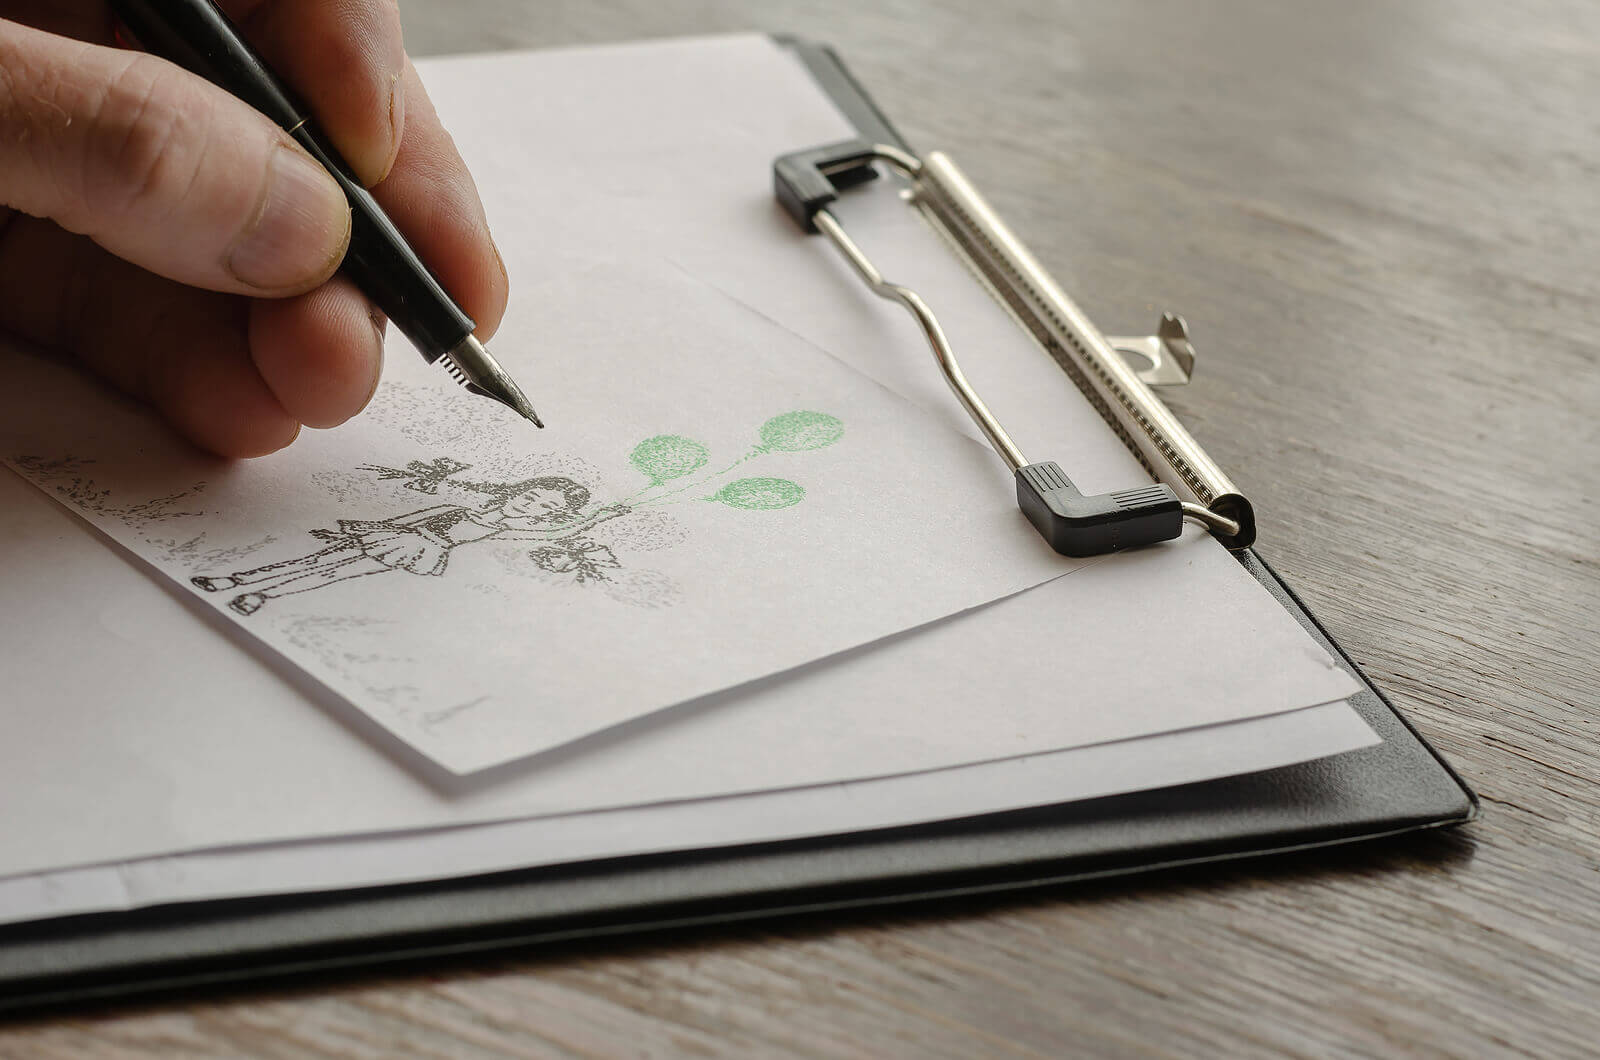  Save Download Preview An adult male hand draws a girl with green balloons on paper. 